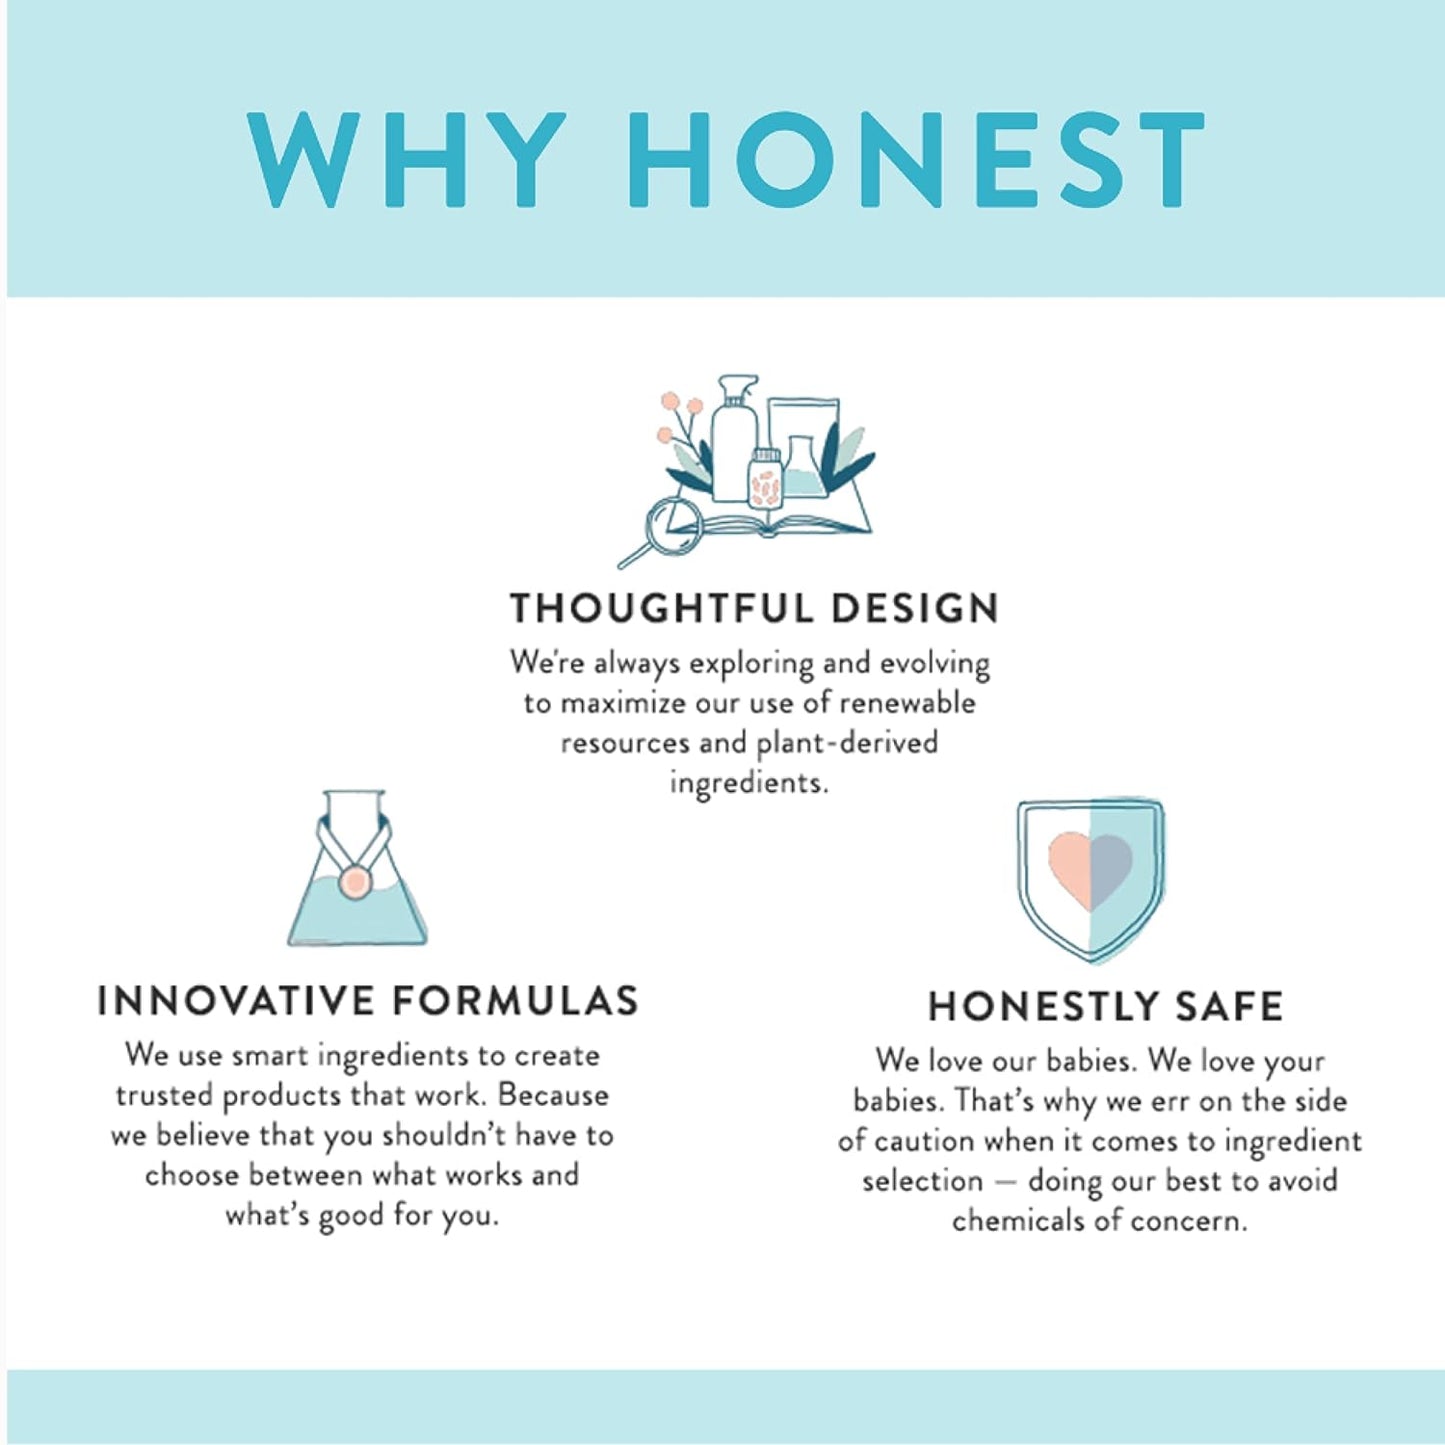 The Honest Company Silicone-Free Conditioner | Gentle for Baby | Naturally Derived, Tear-free, Hypoallergenic | Fragrance Free Sensitive, 10 fl oz